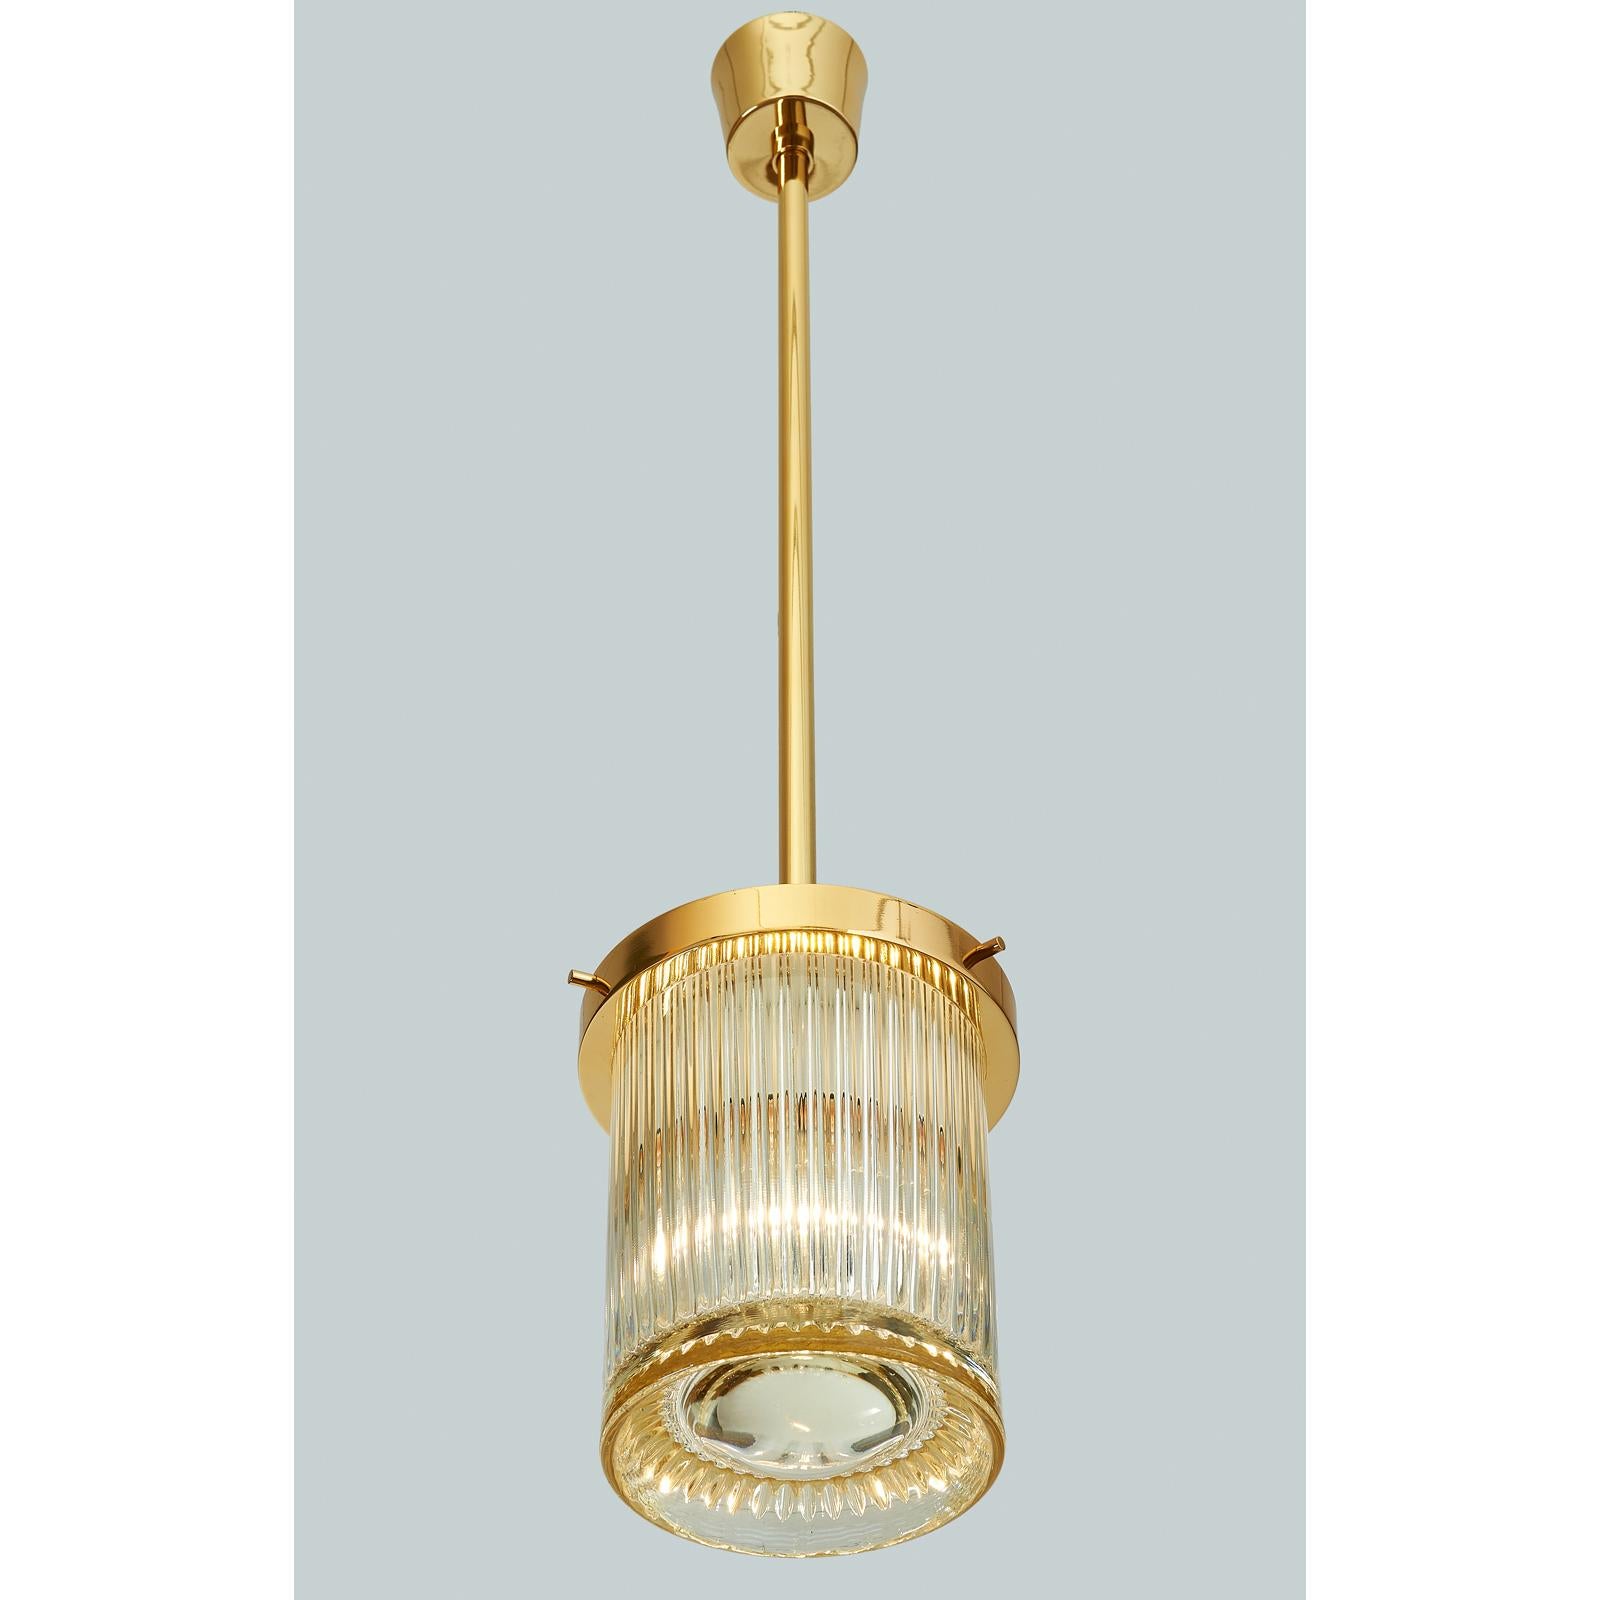 Pair of vintage rich ribbed glass lamps by Angelo Mangiarotti with central oculus lens, adaptively reconfigured as lanterns in our workshops, with newly made polished brass or nickeled mounts.
Italy, 2019
Two available in gold tone glass with